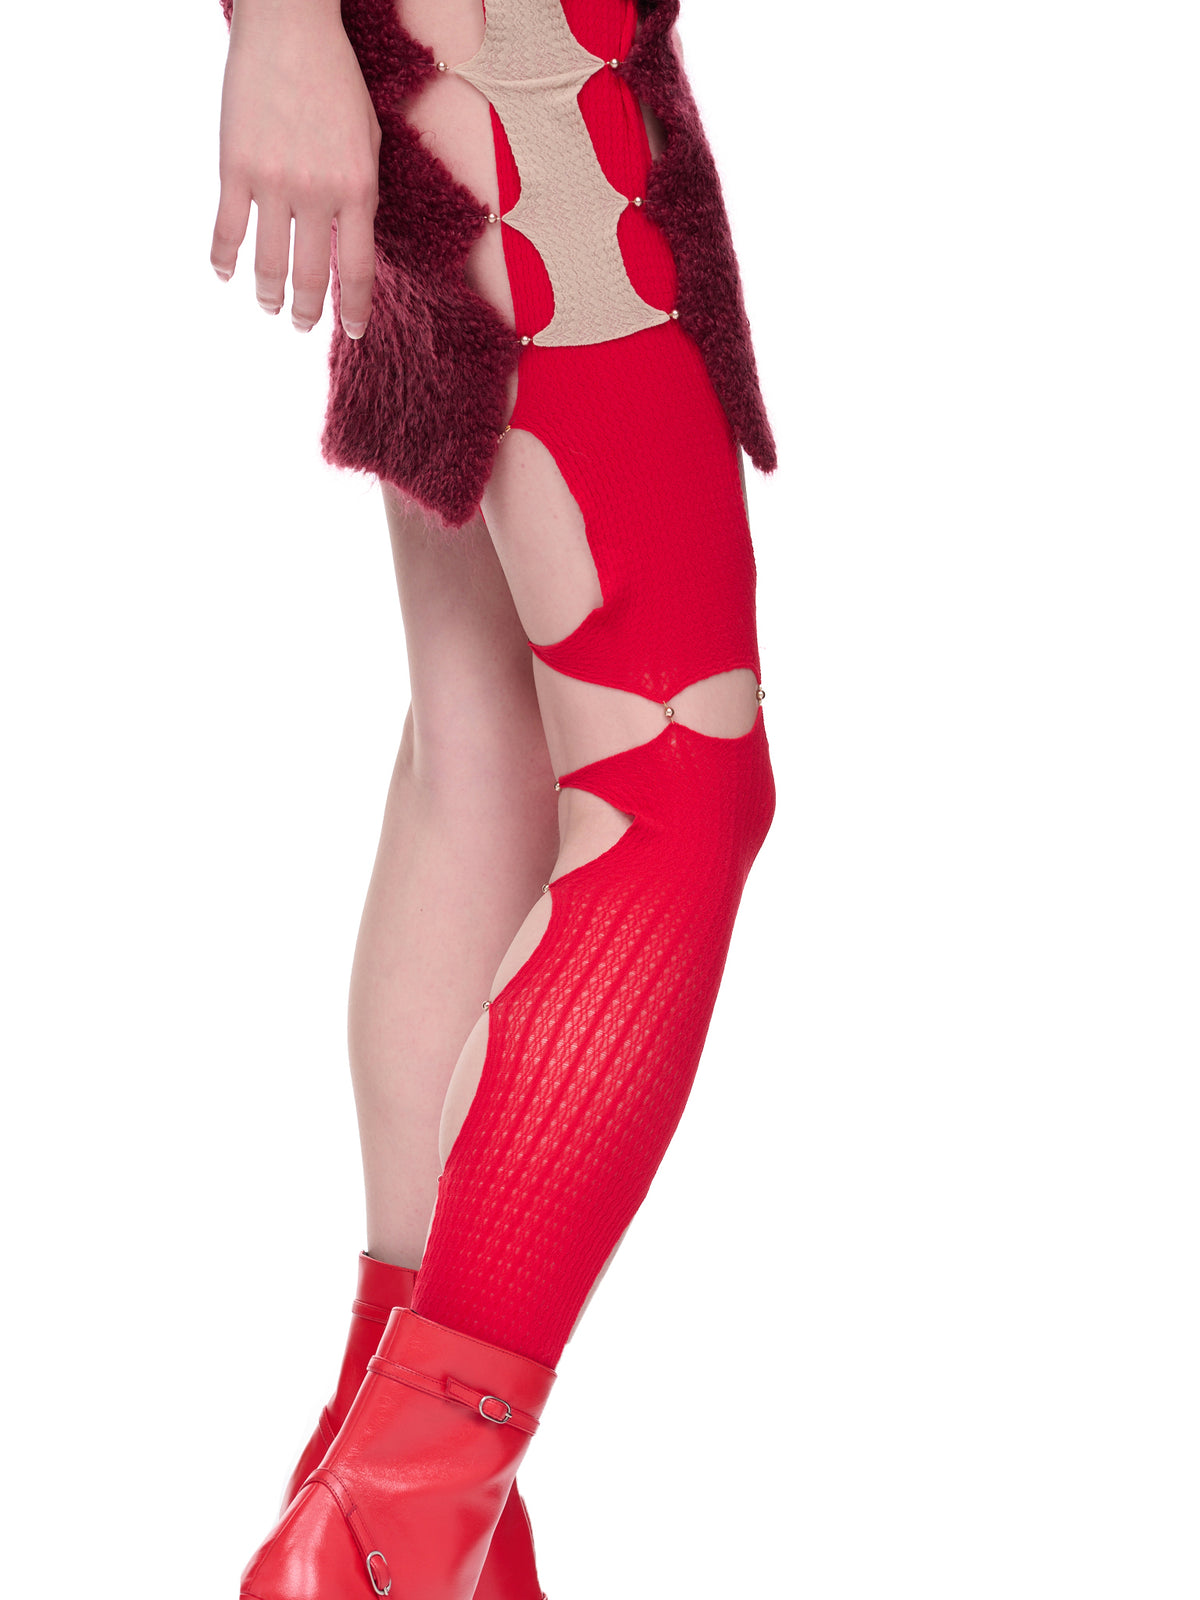 Single Cut-Out Stocking (SF03R-RUBY)